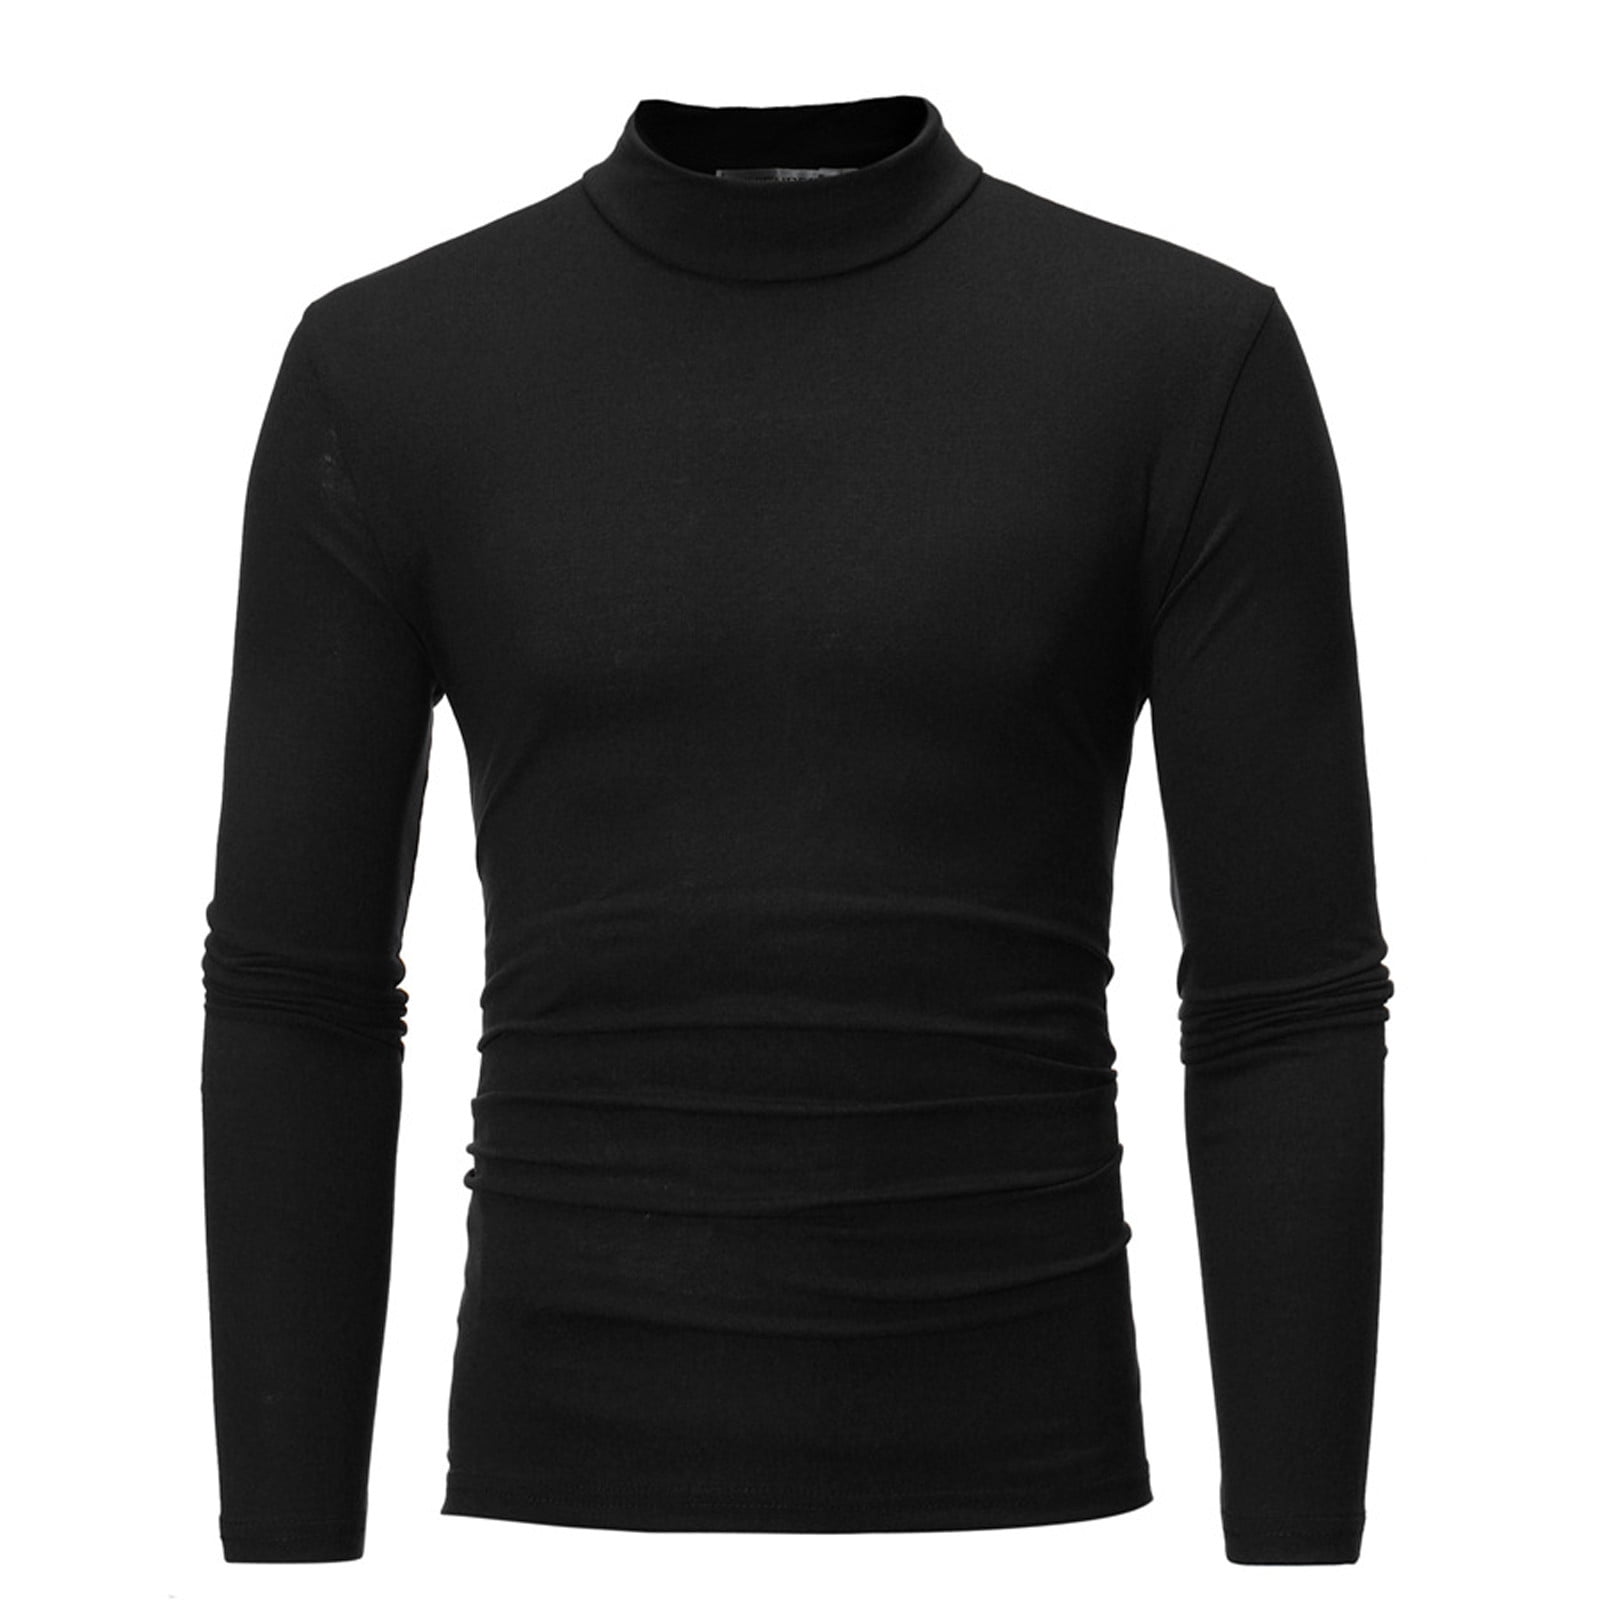 Clearance Men's Casual Fit Basic Layer Tops Elastic Mock Neck ...